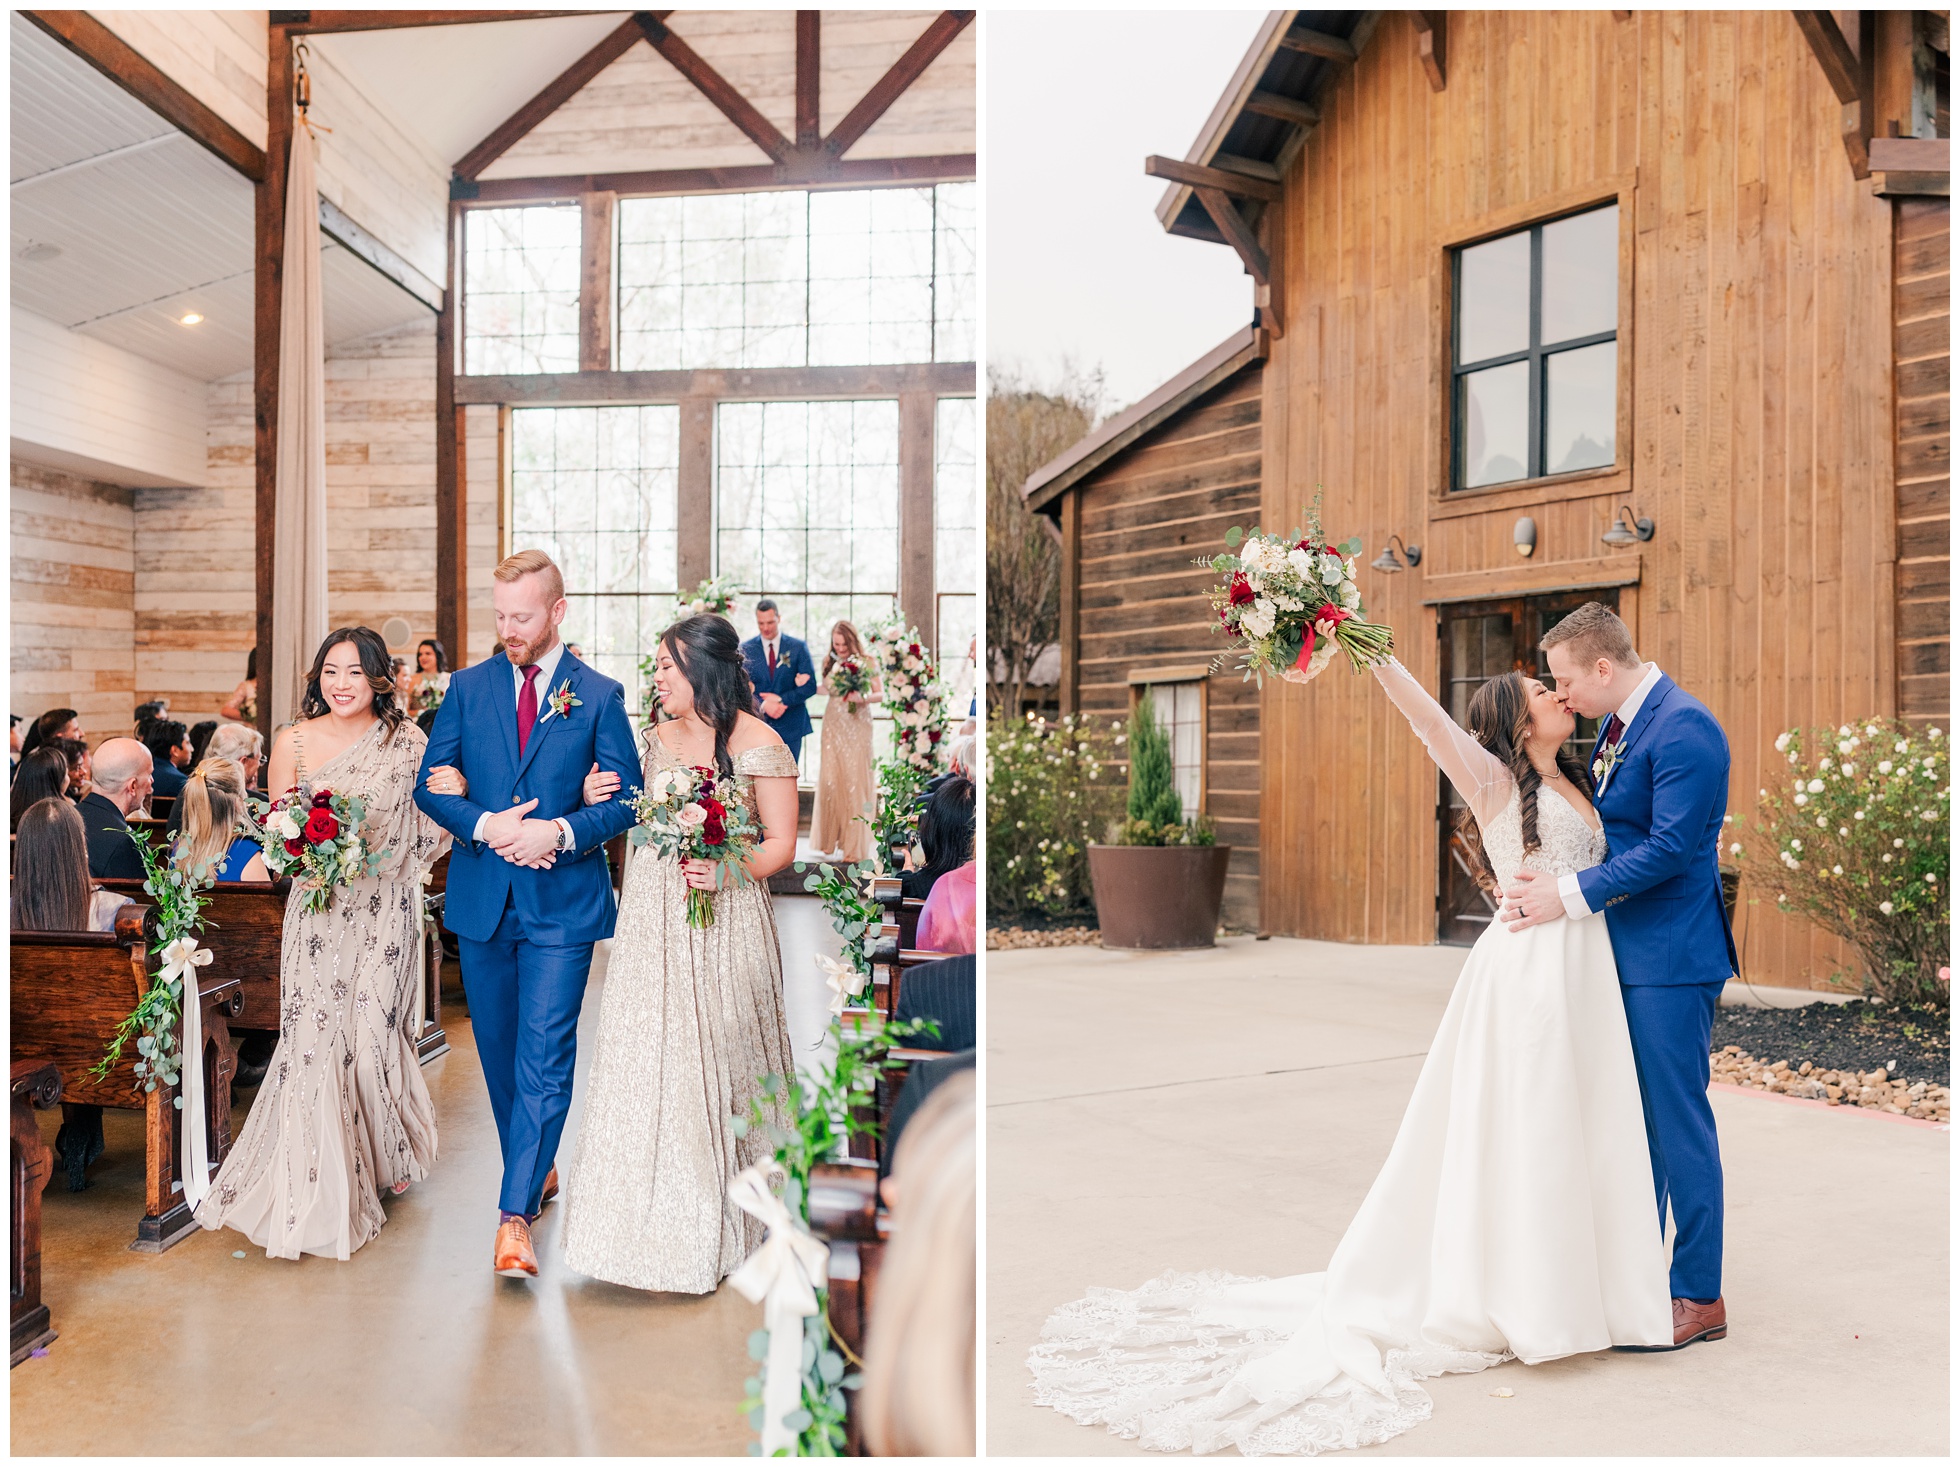 Bridesmaids and Groomsmen, Bride and Groom at the end of the ceremony at Big Sky Barn.